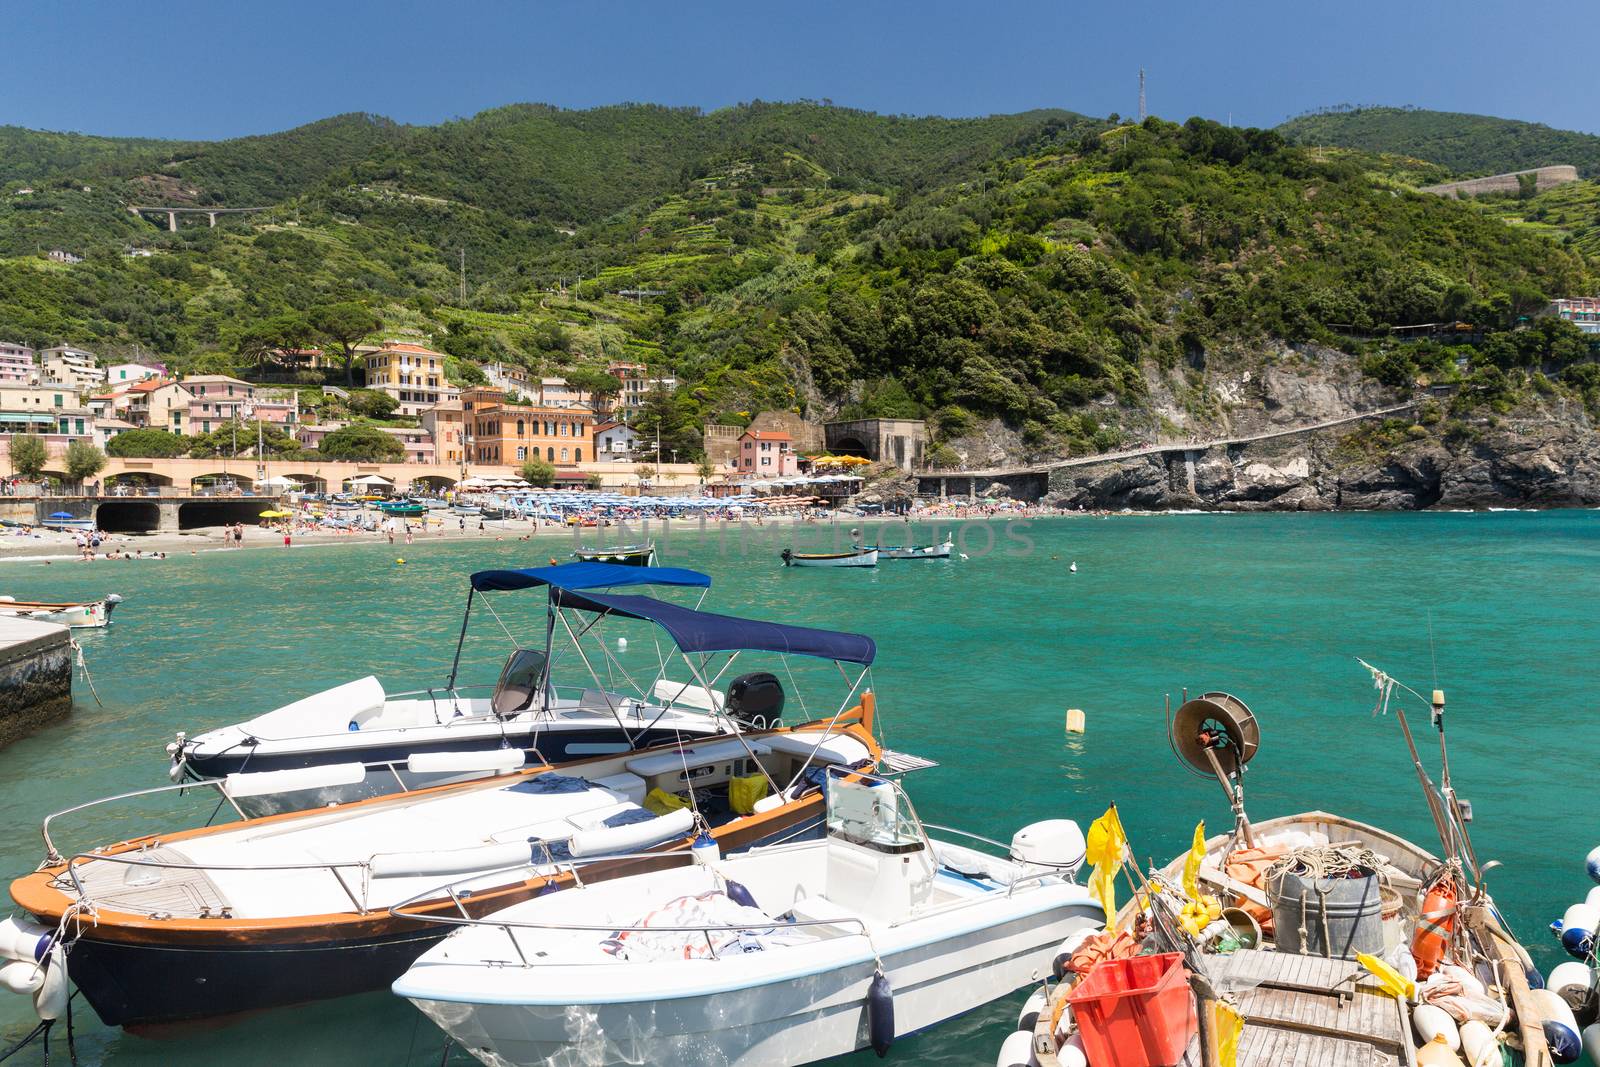 The town of Monterosso of the Cinque Terre, on the Italian Riviera in the Liguria region of Italy